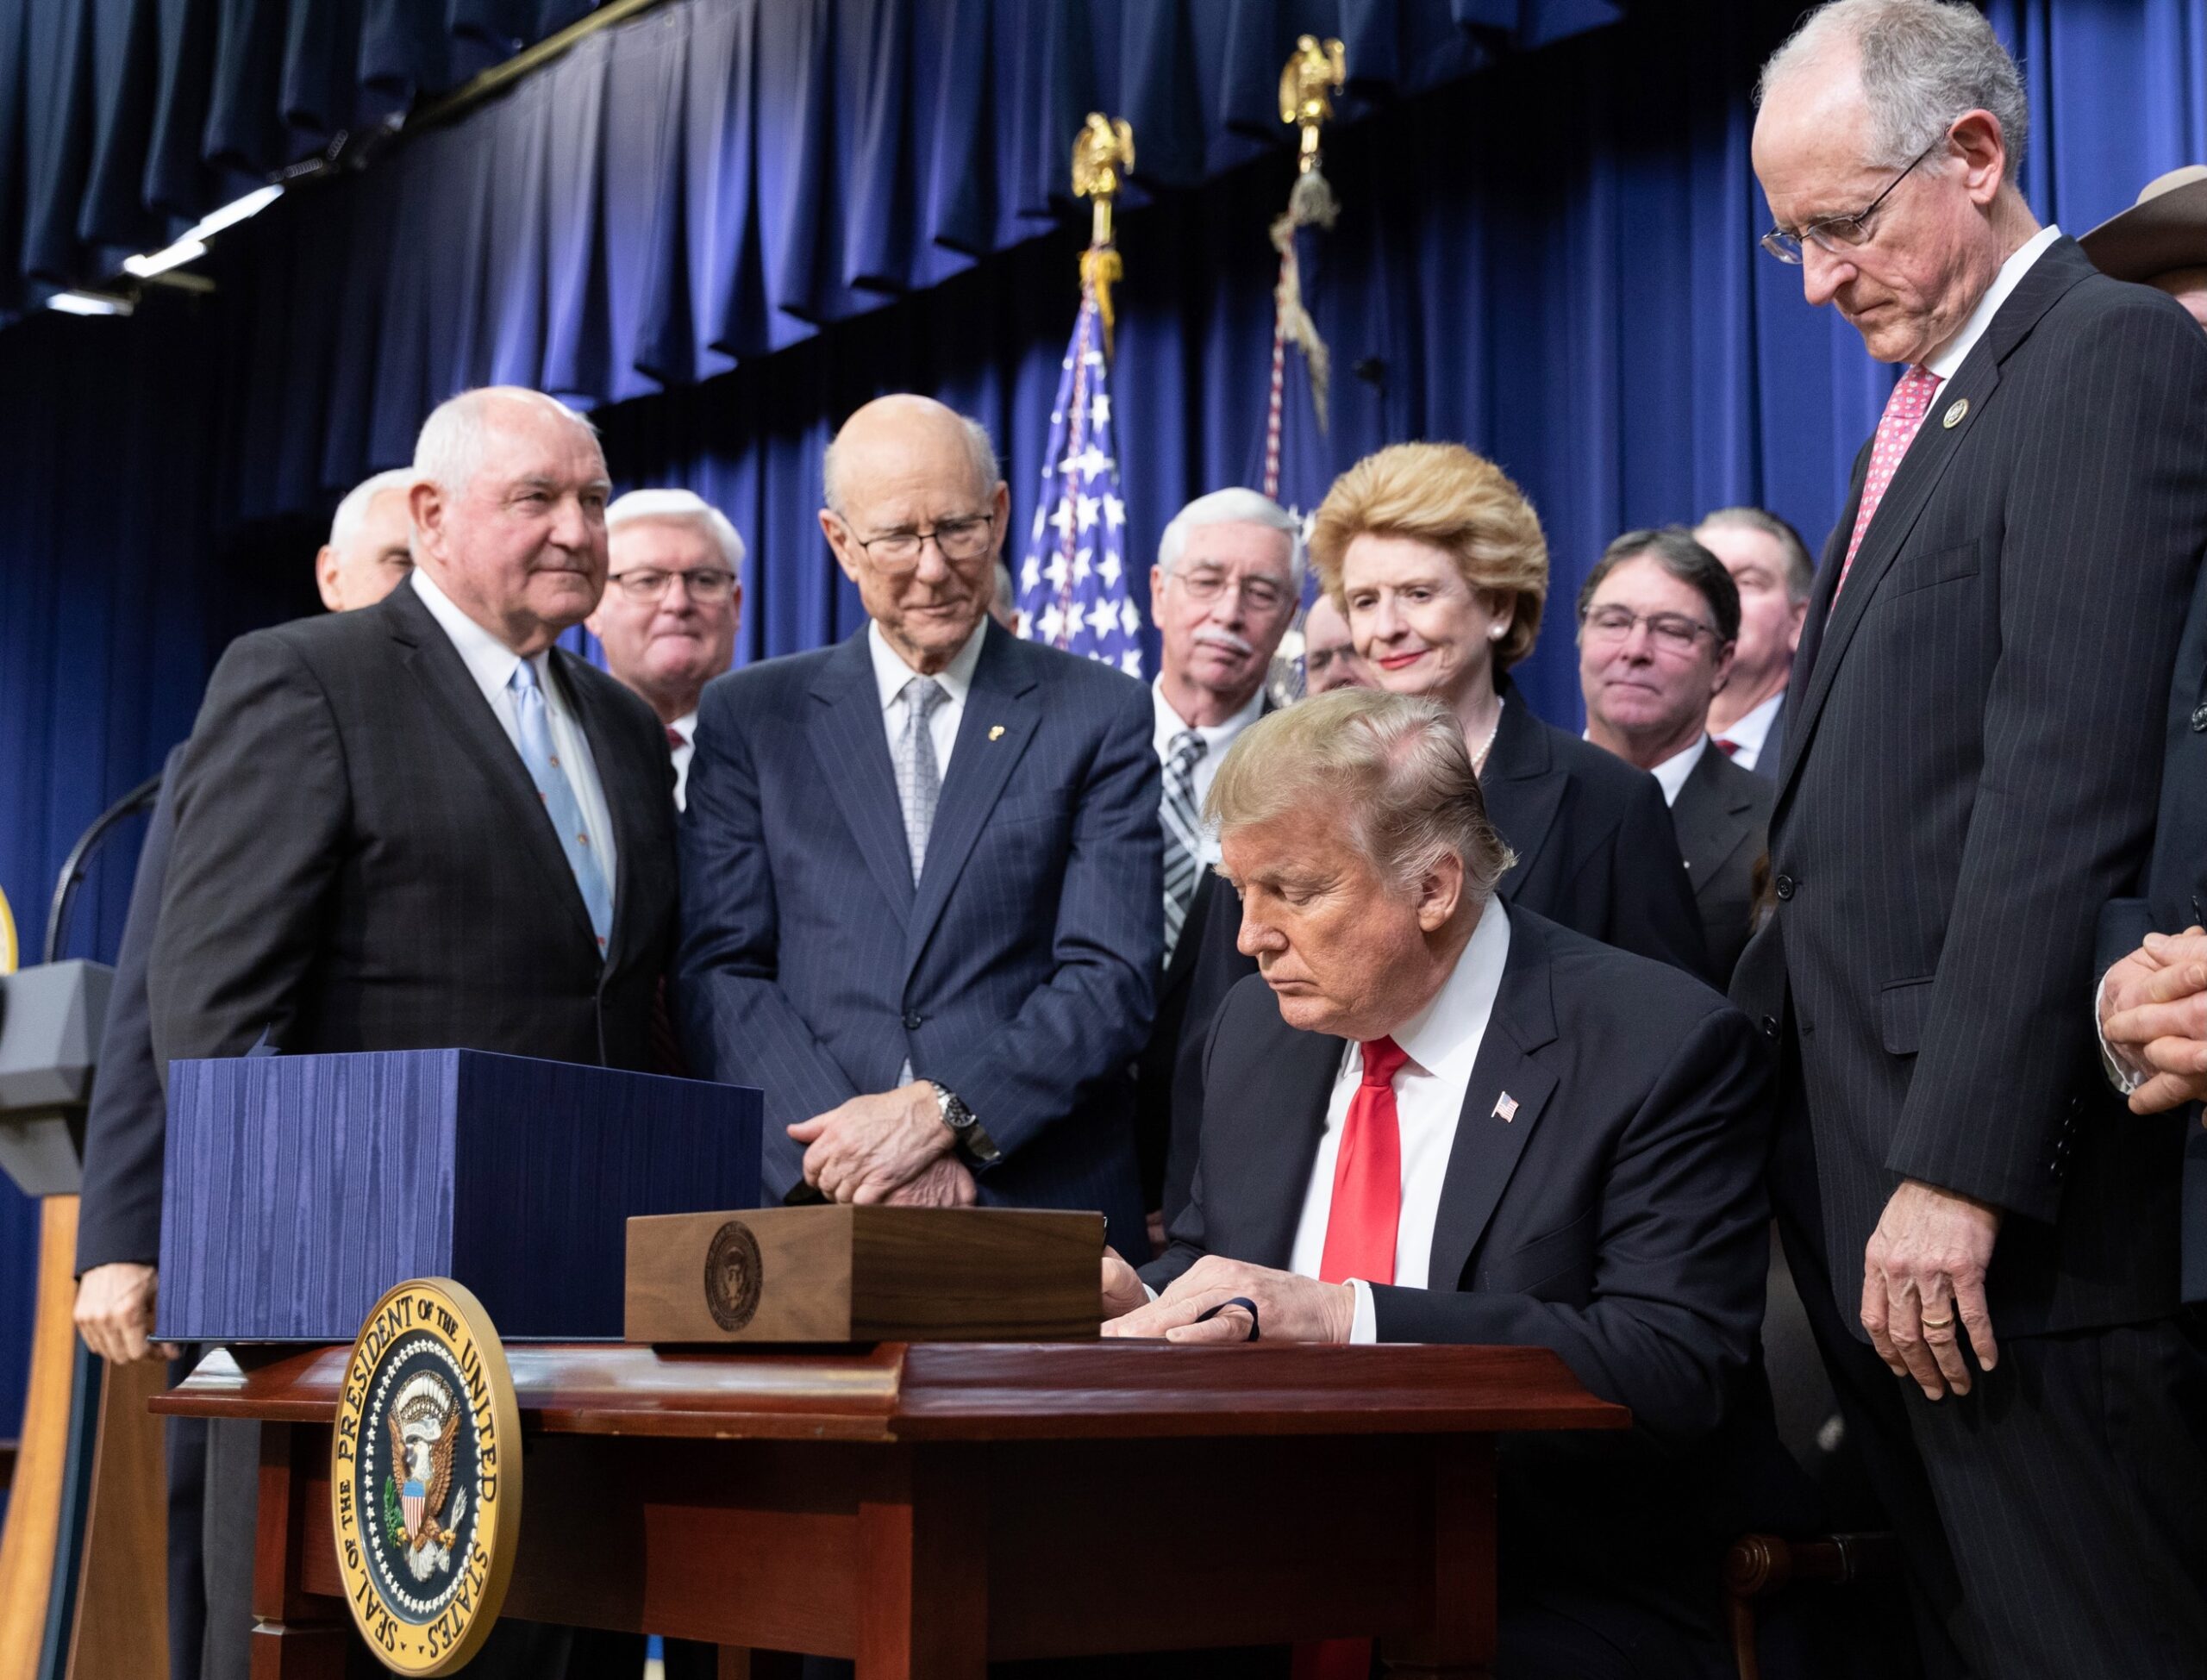 Former President Donald Trump signs the farm bill surrounded by lawmakers on both sides of the aisle.